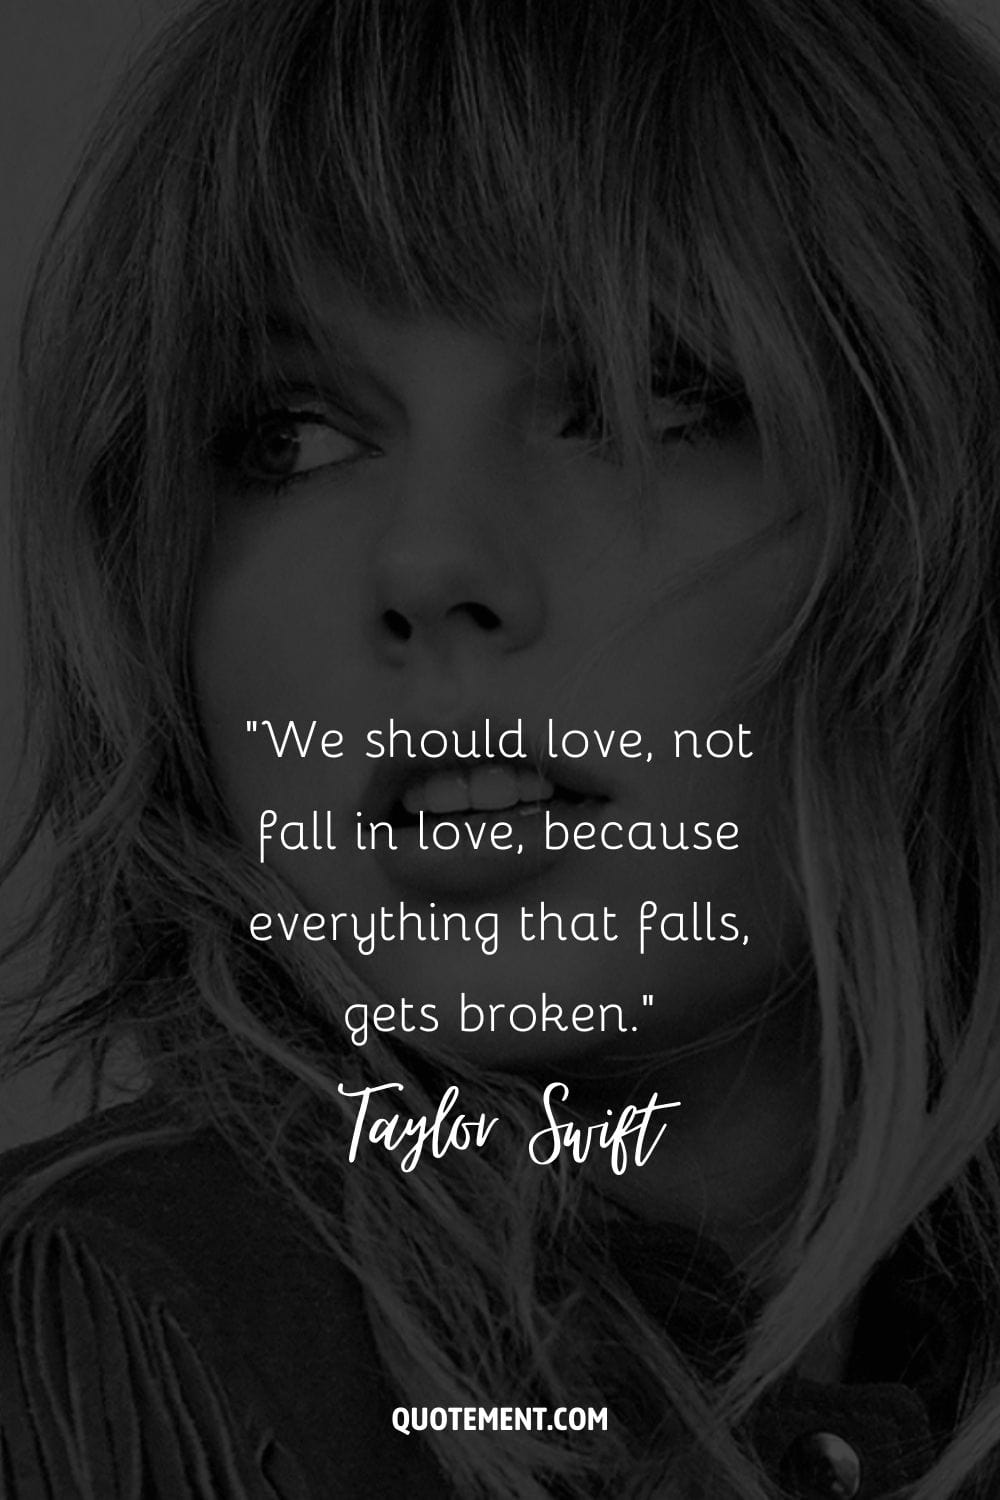 “We should love, not fall in love, because everything that falls, gets broken.” ― Taylor Swift